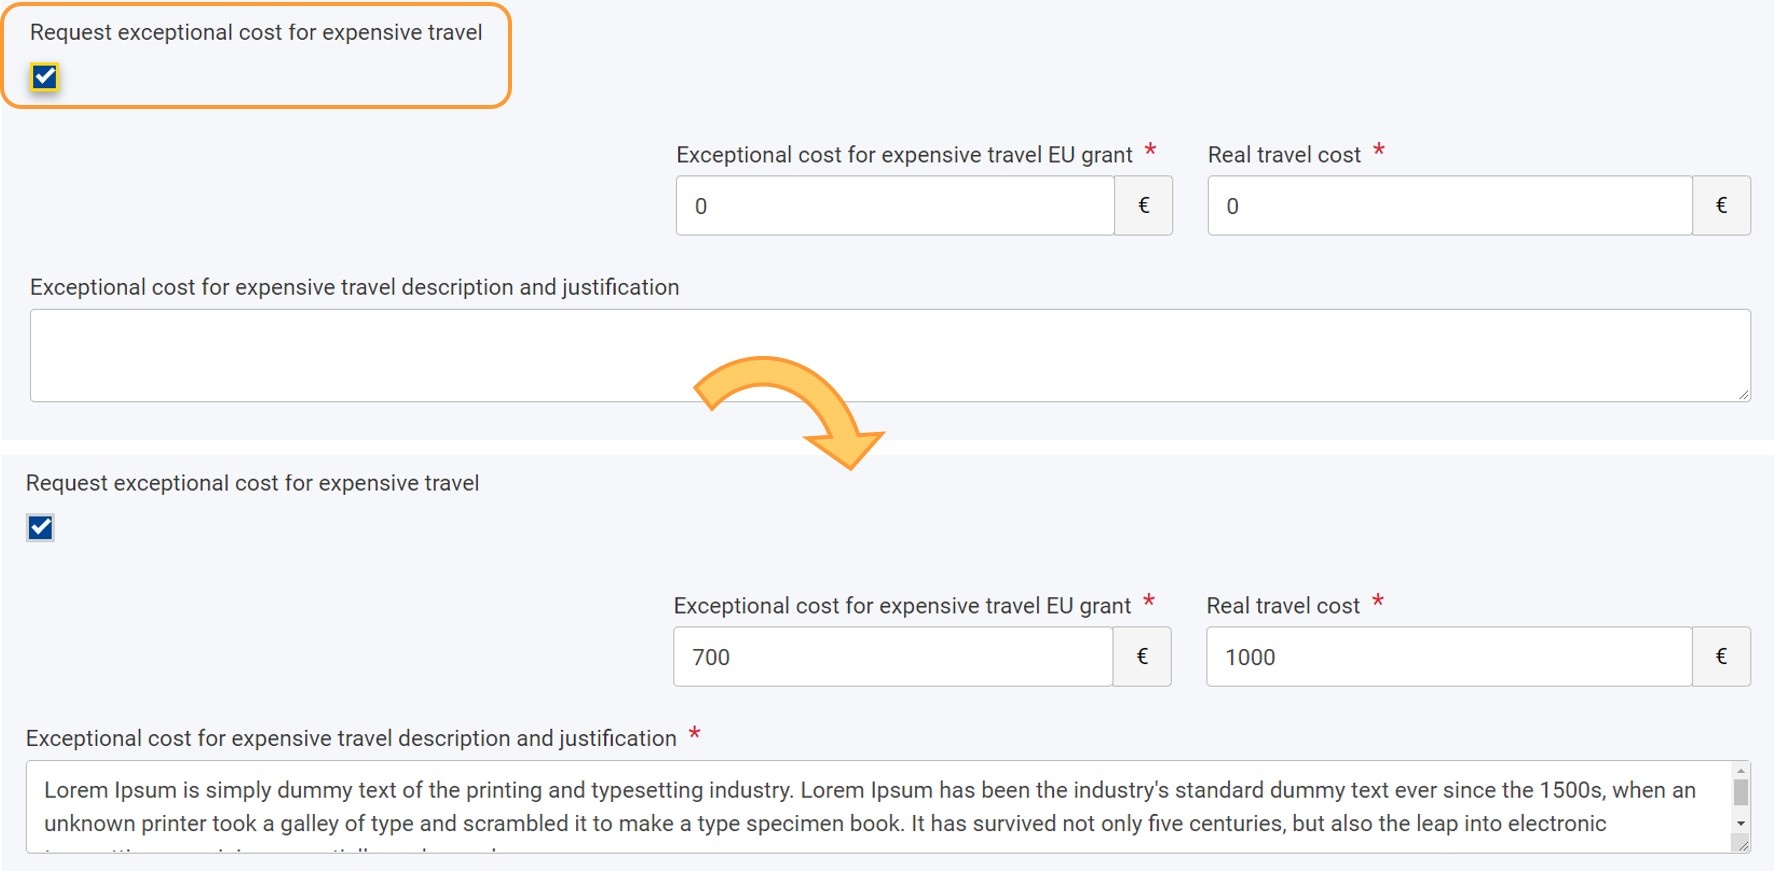 Example of available fields if Request exceptional cost for expensive travel